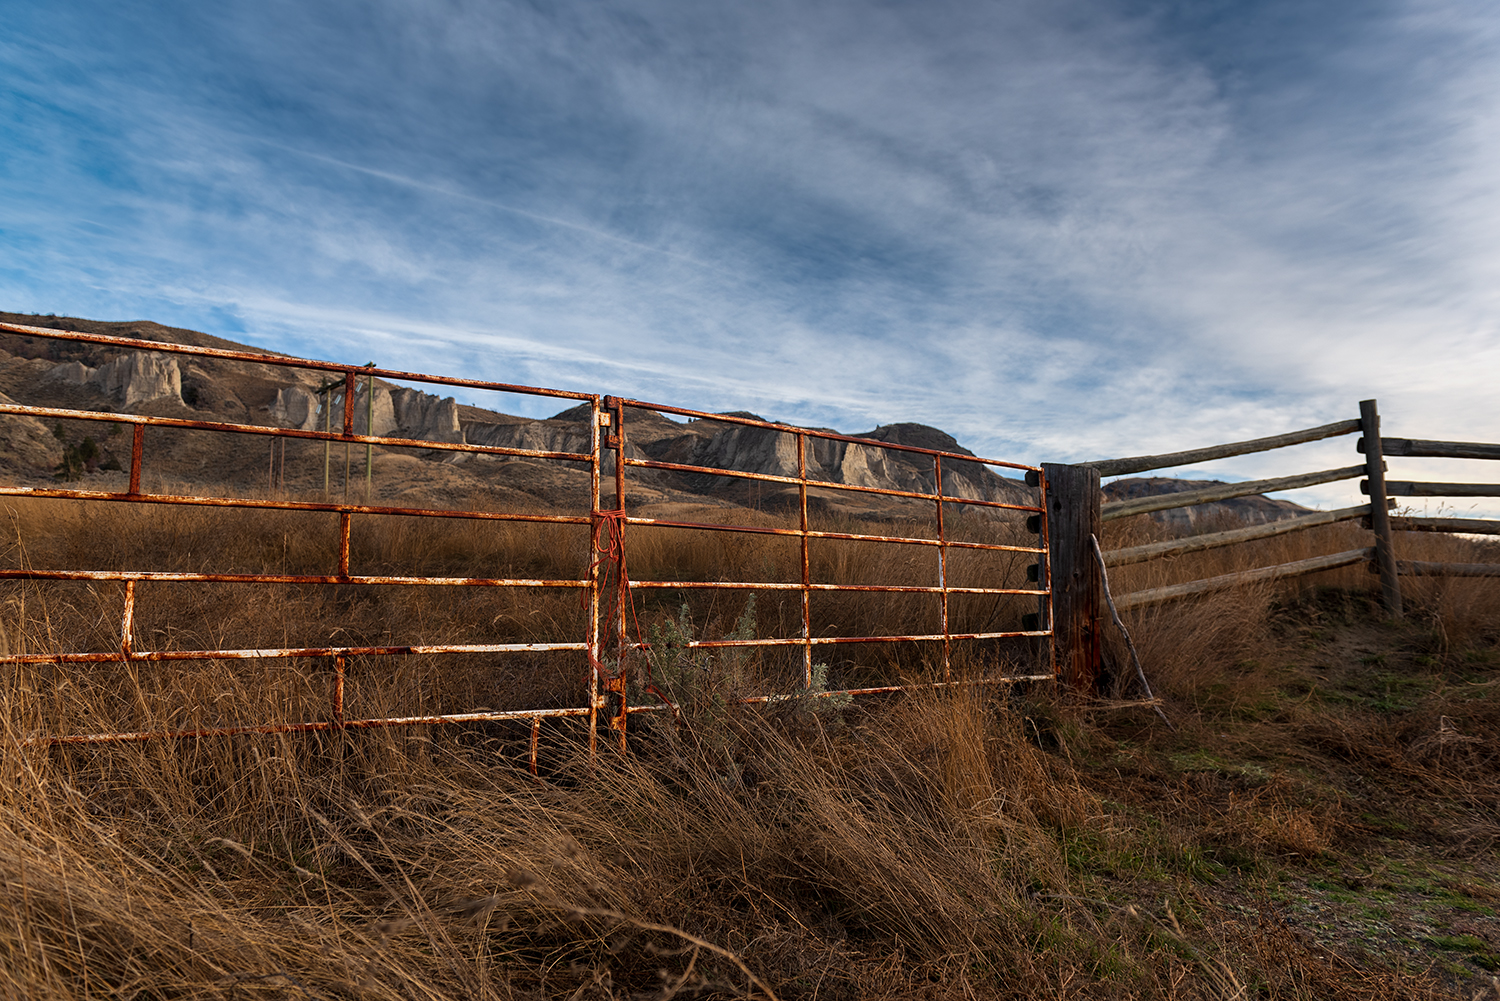 Kamloops rural life rusted fence against tall grass and mountain with blue sky and clouds